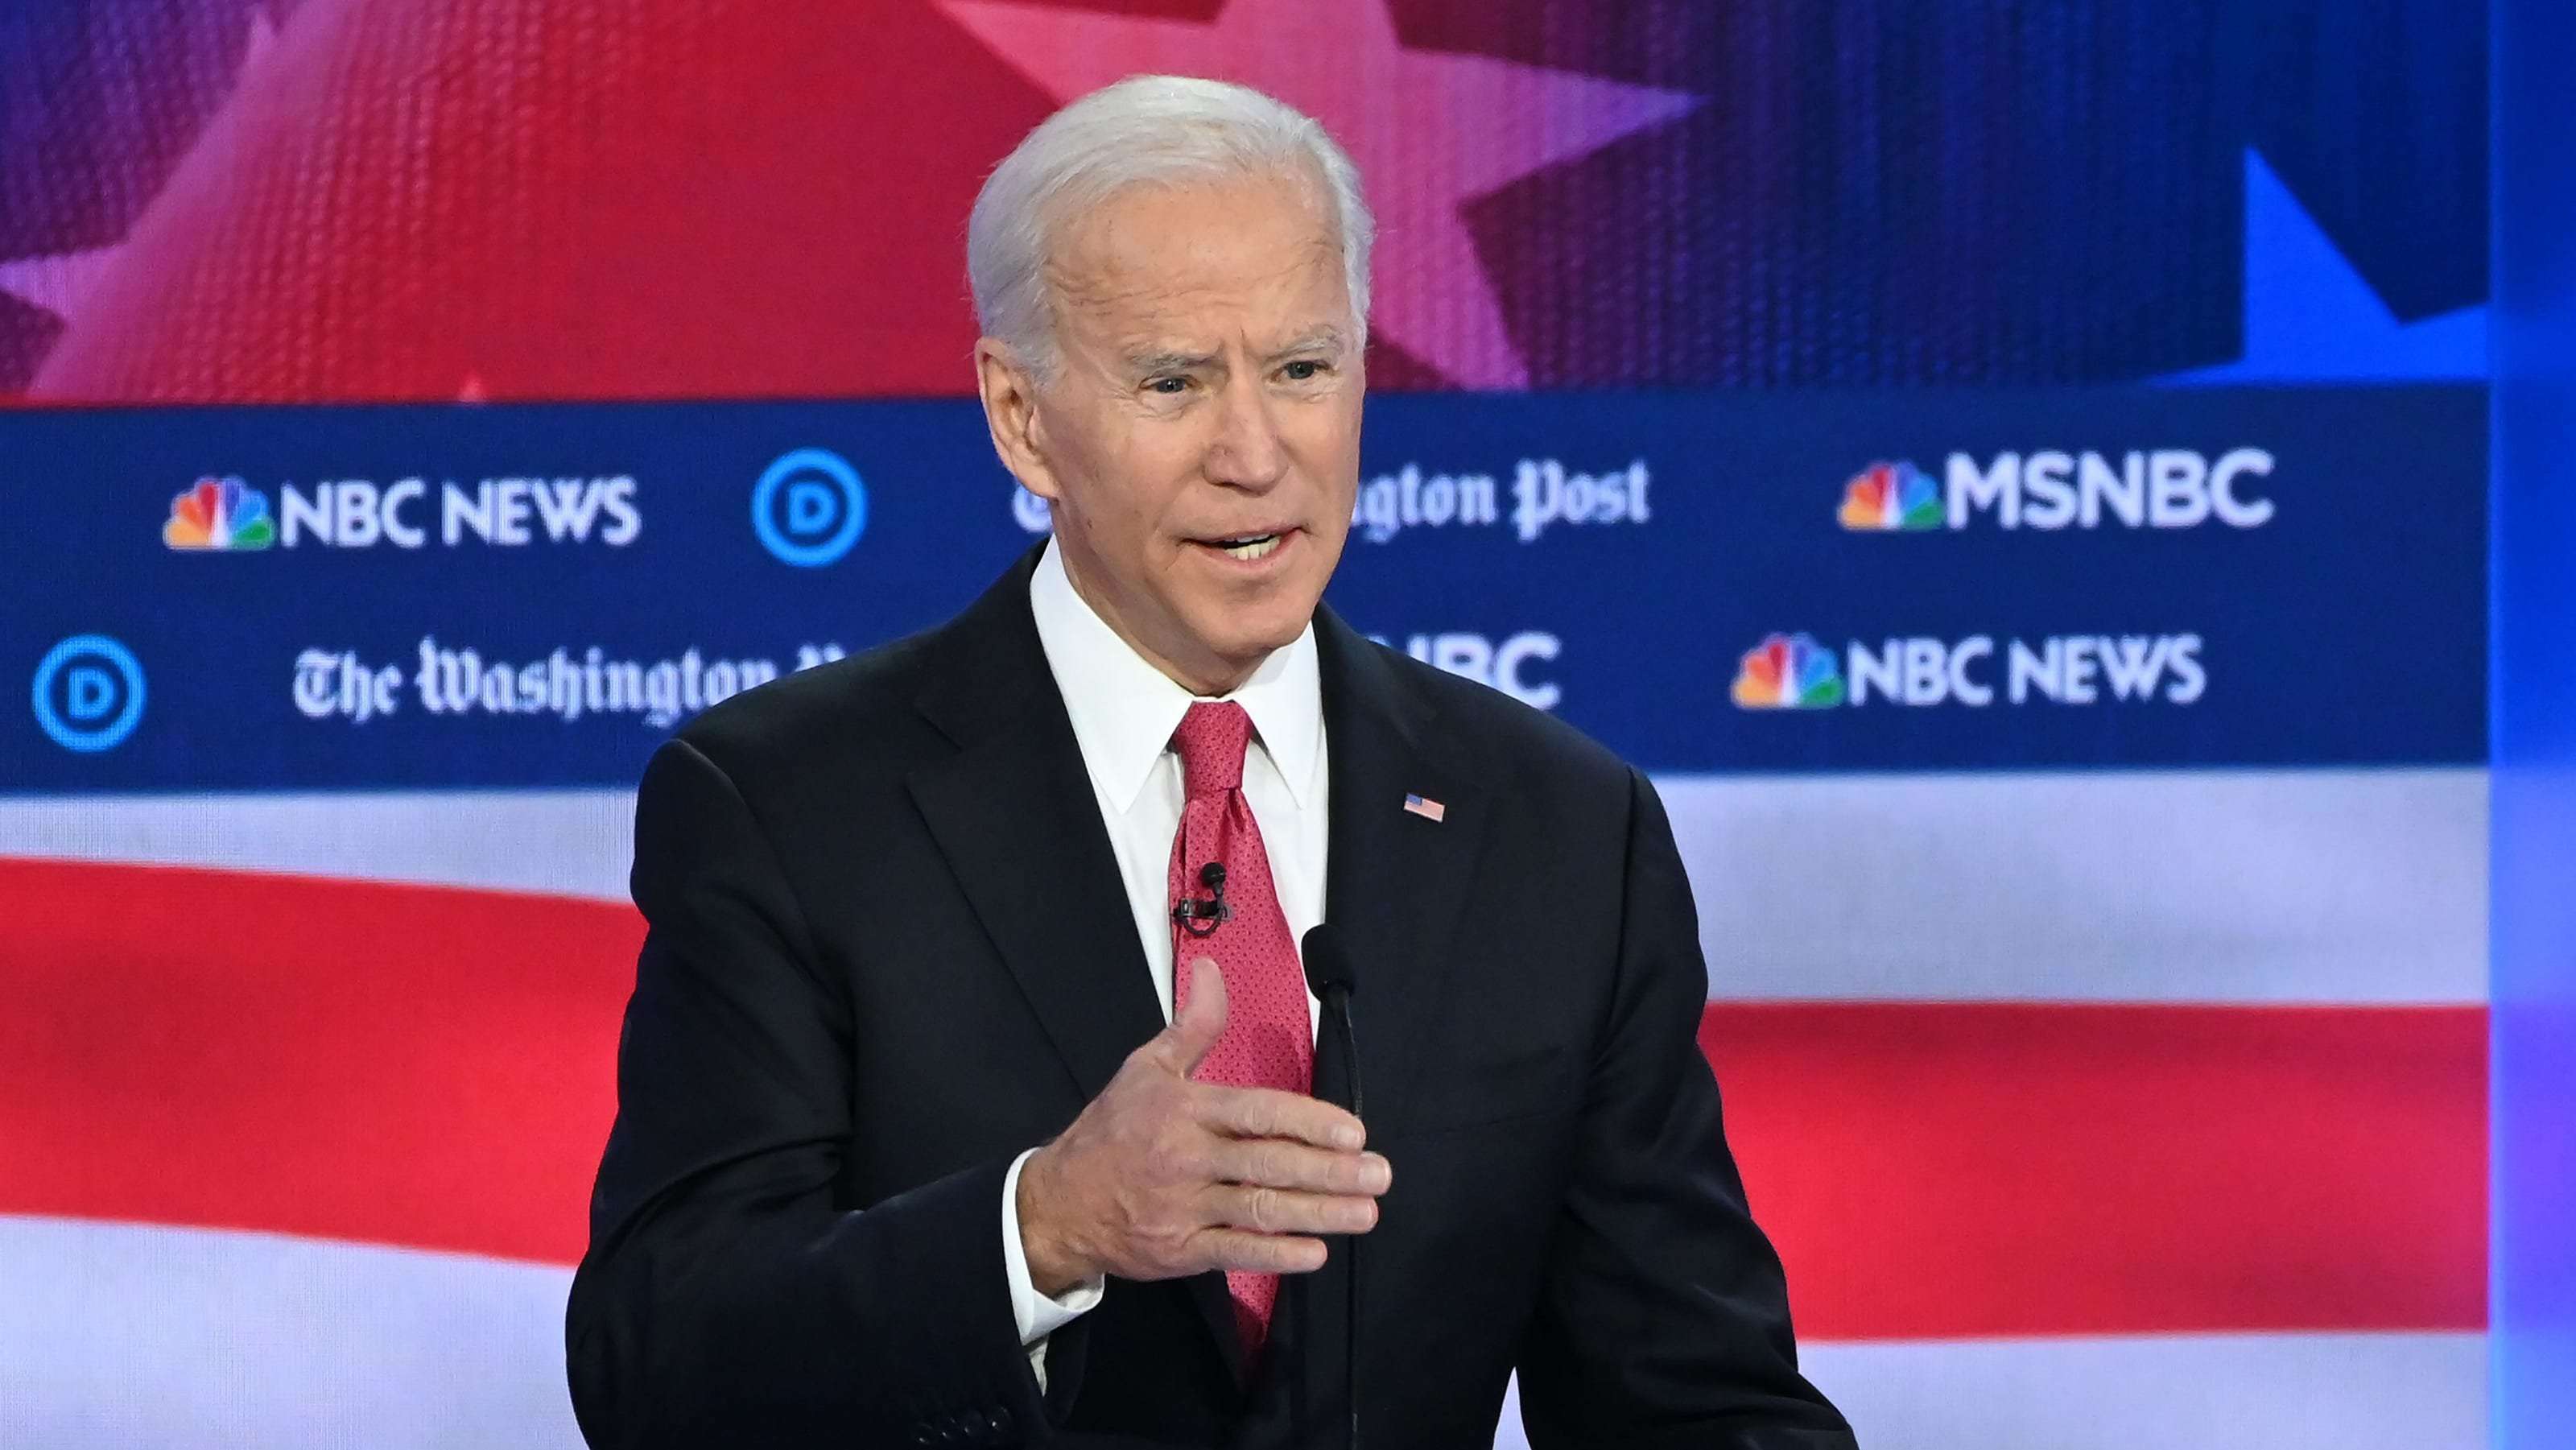 image for Democrat debate: Biden said you have to 'keep punching' domestic violence